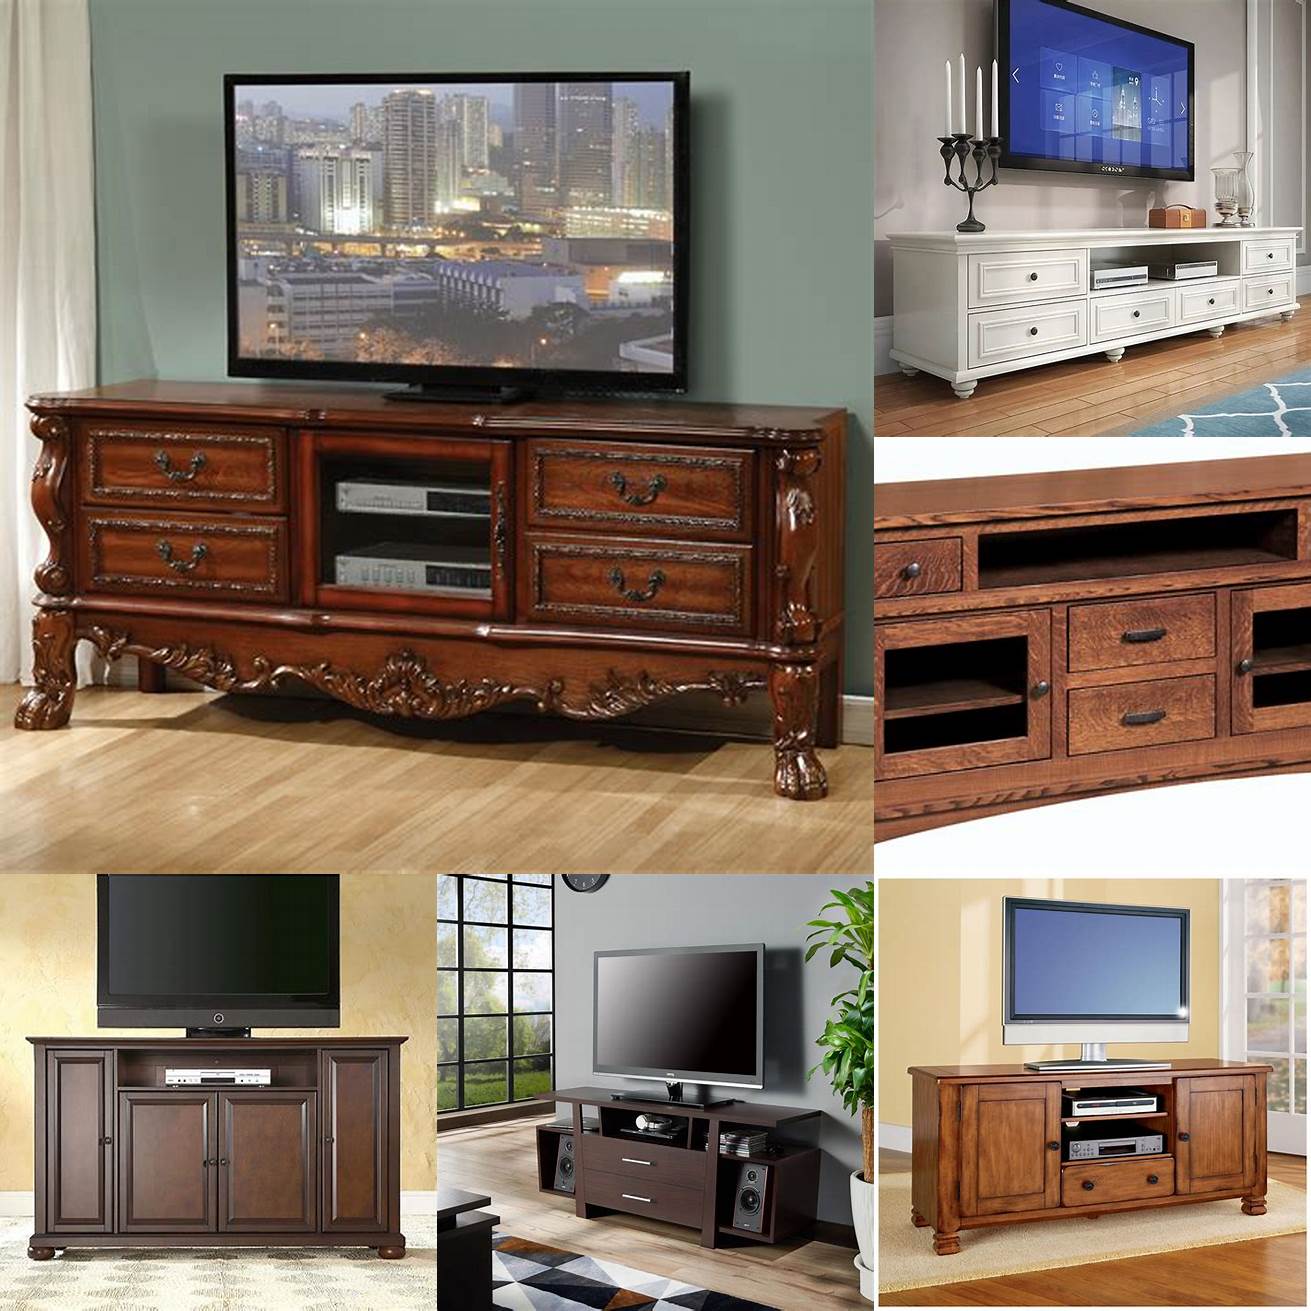 A TV stand with a traditional design